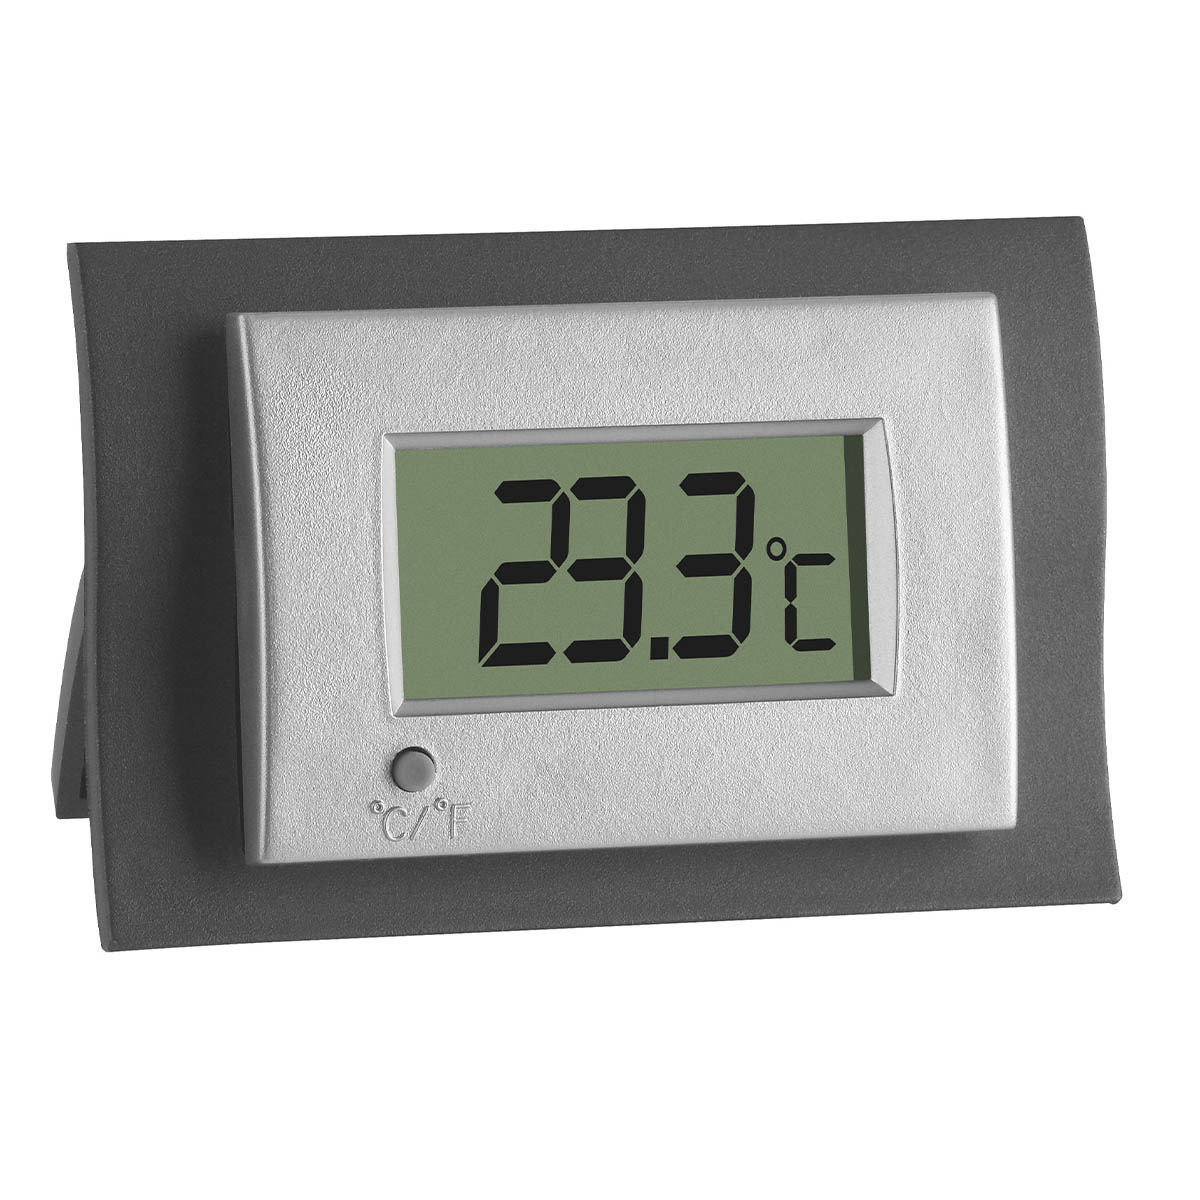 30-2023-digitales-thermometer-1200x1200px.jpg